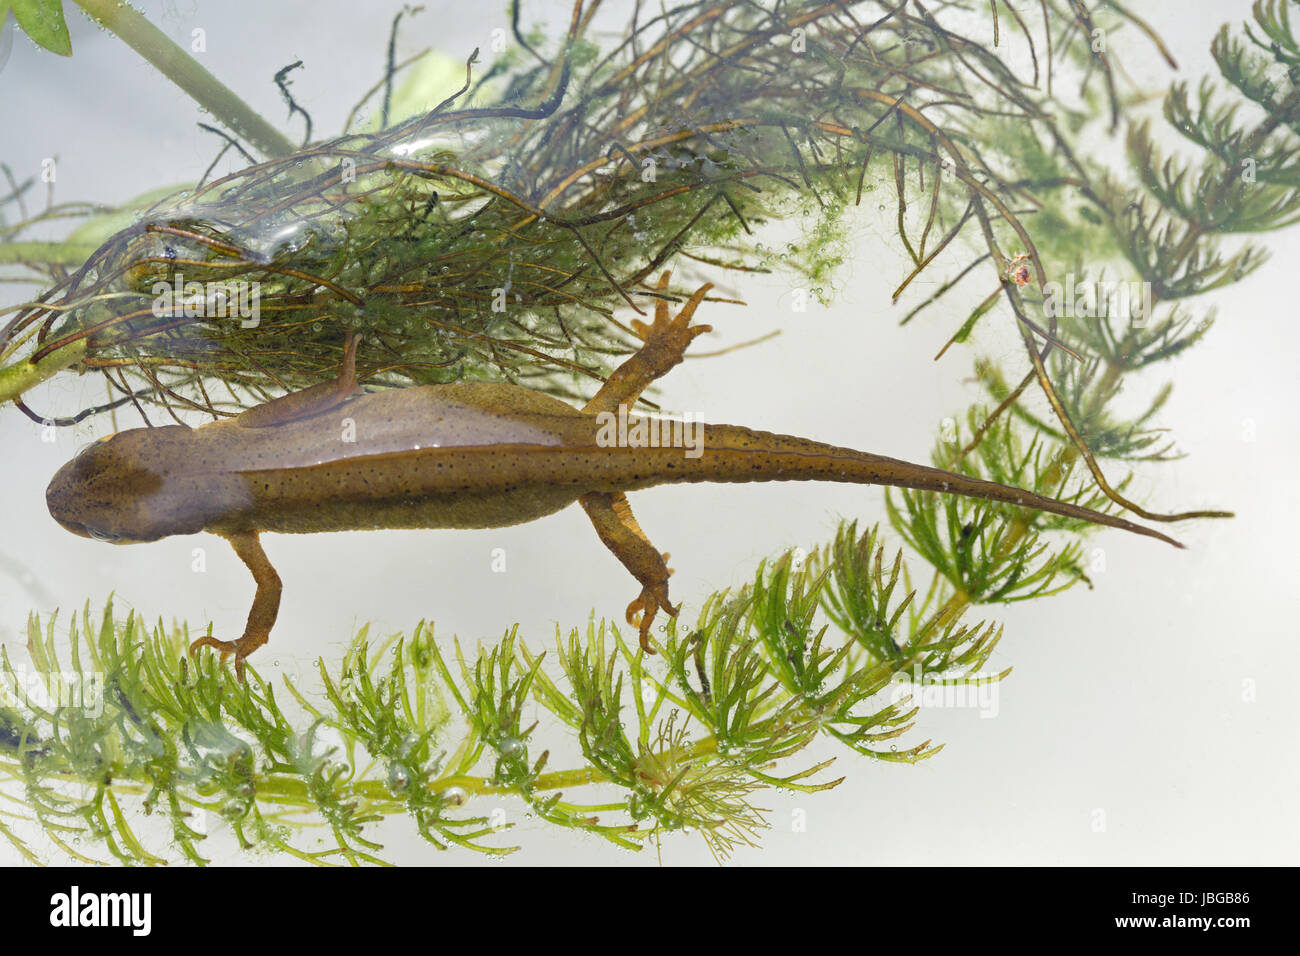 SMOOTH or COMMON NEWT. Lissotriton vulgaris. Adult female in aquatic breeding colour. In water, viewed from above. Dorsal view. Stock Photo